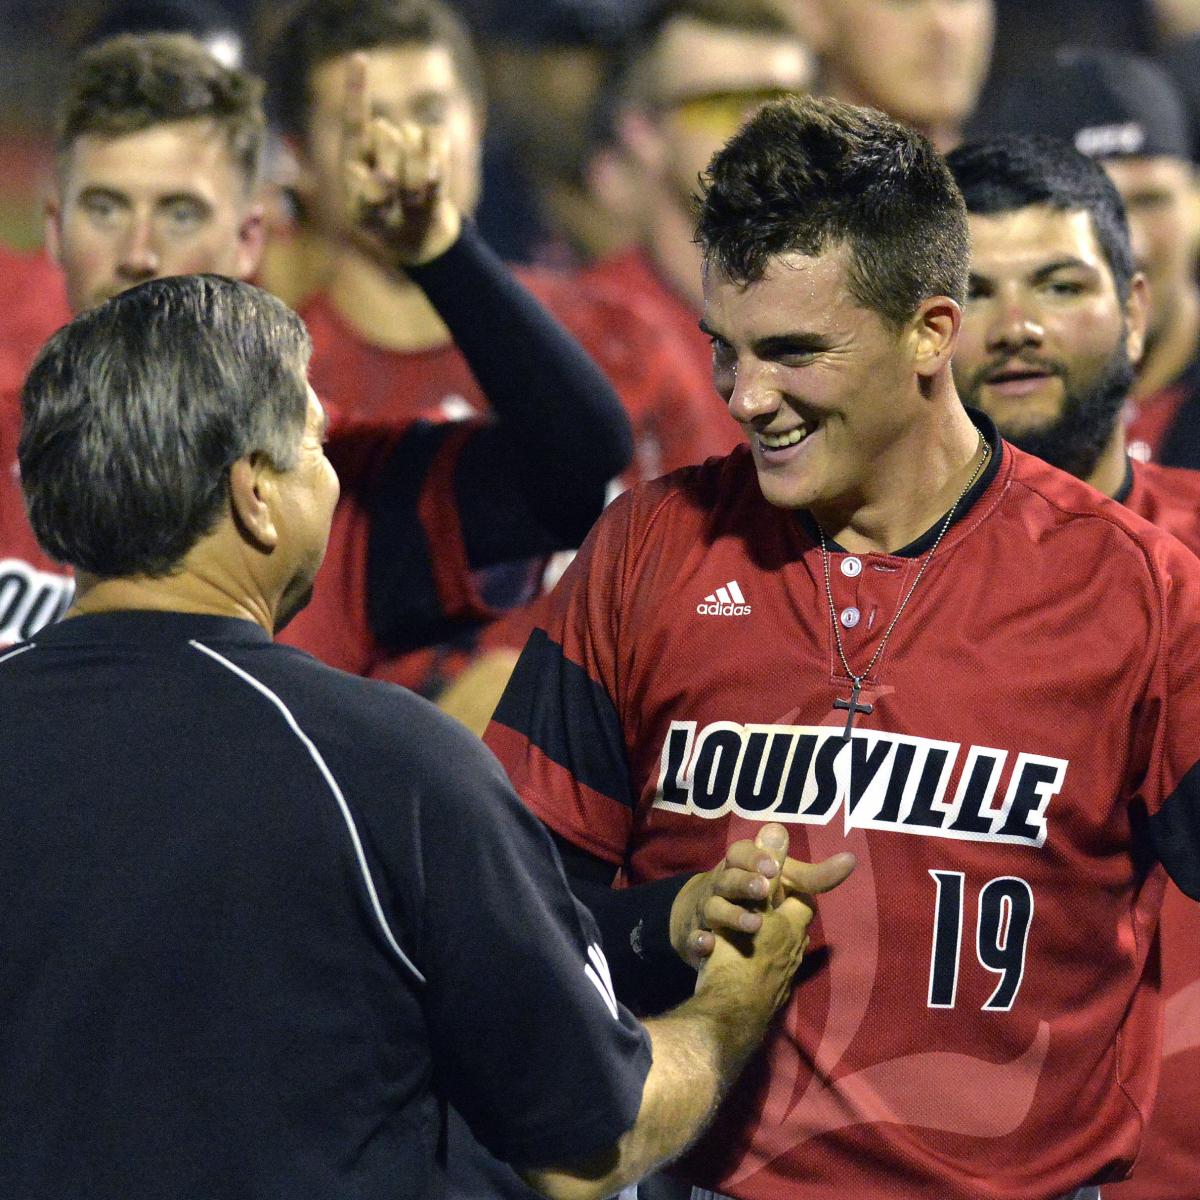 College World Series 2014: Championship Bracket, Predictions and More